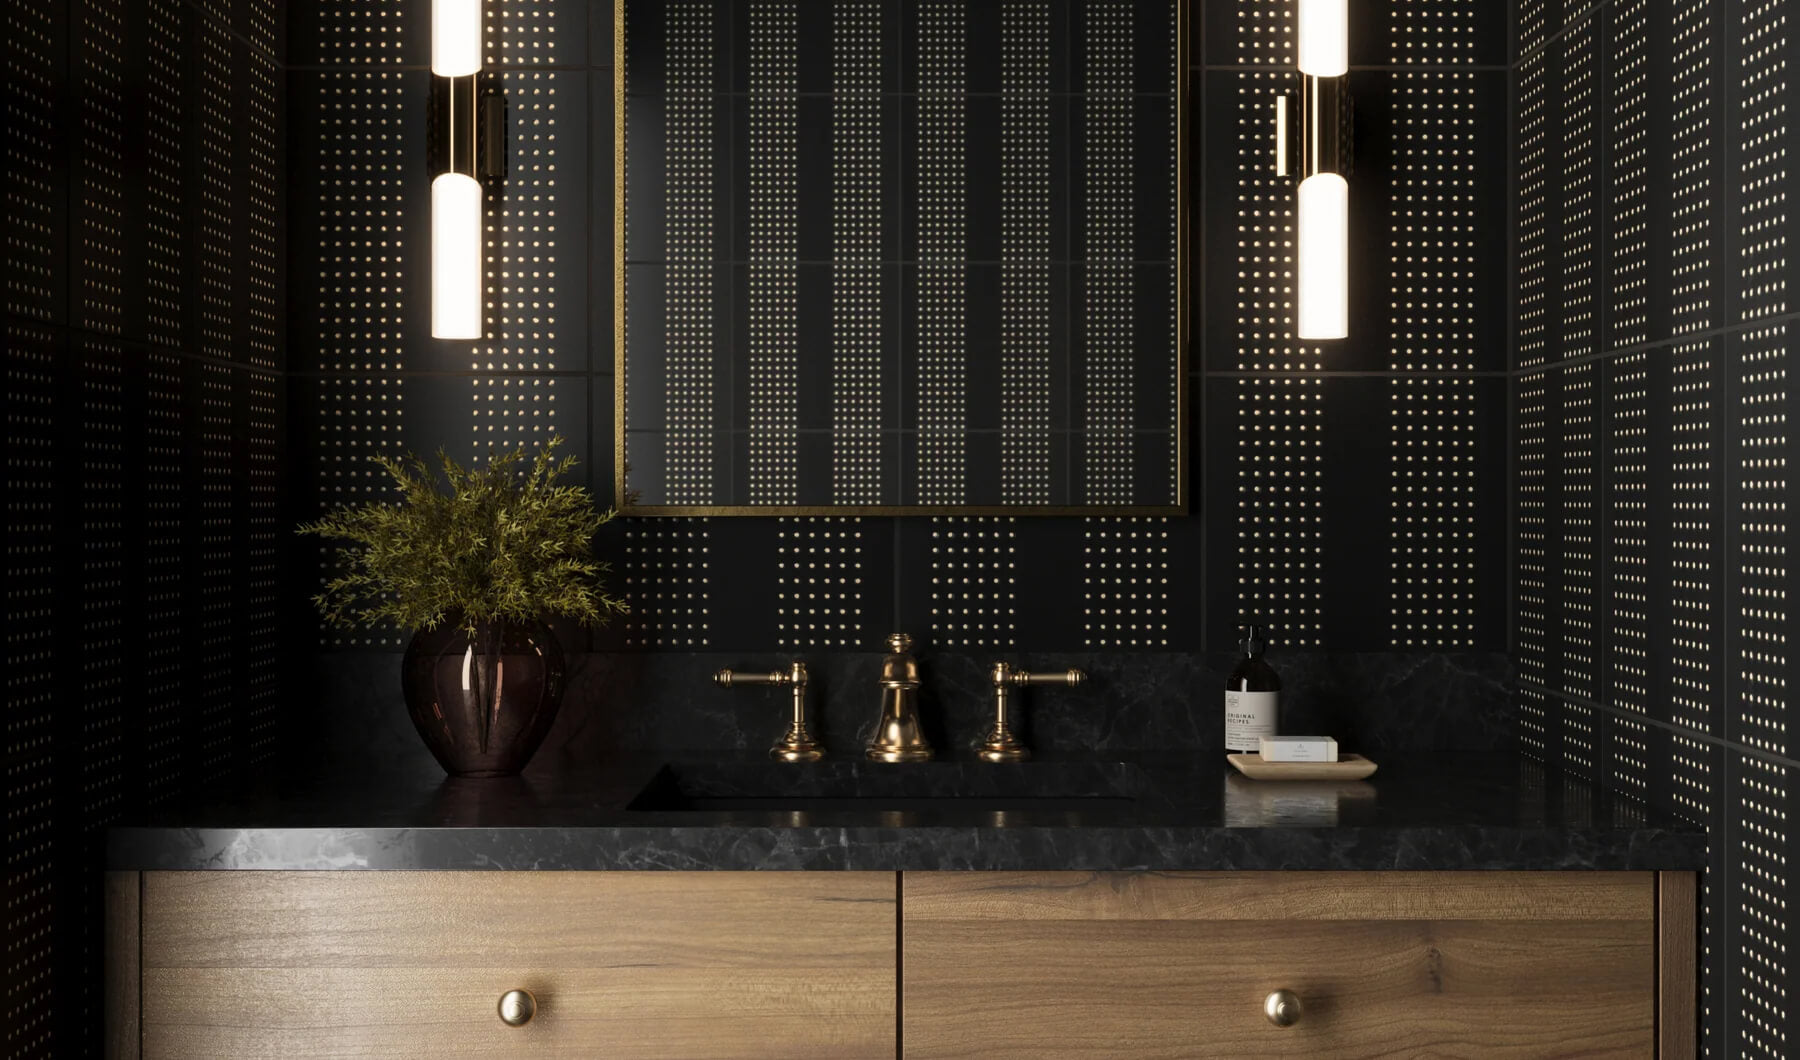 Chic bathroom vanity against a perforated black tile backdrop, exuding modern luxury